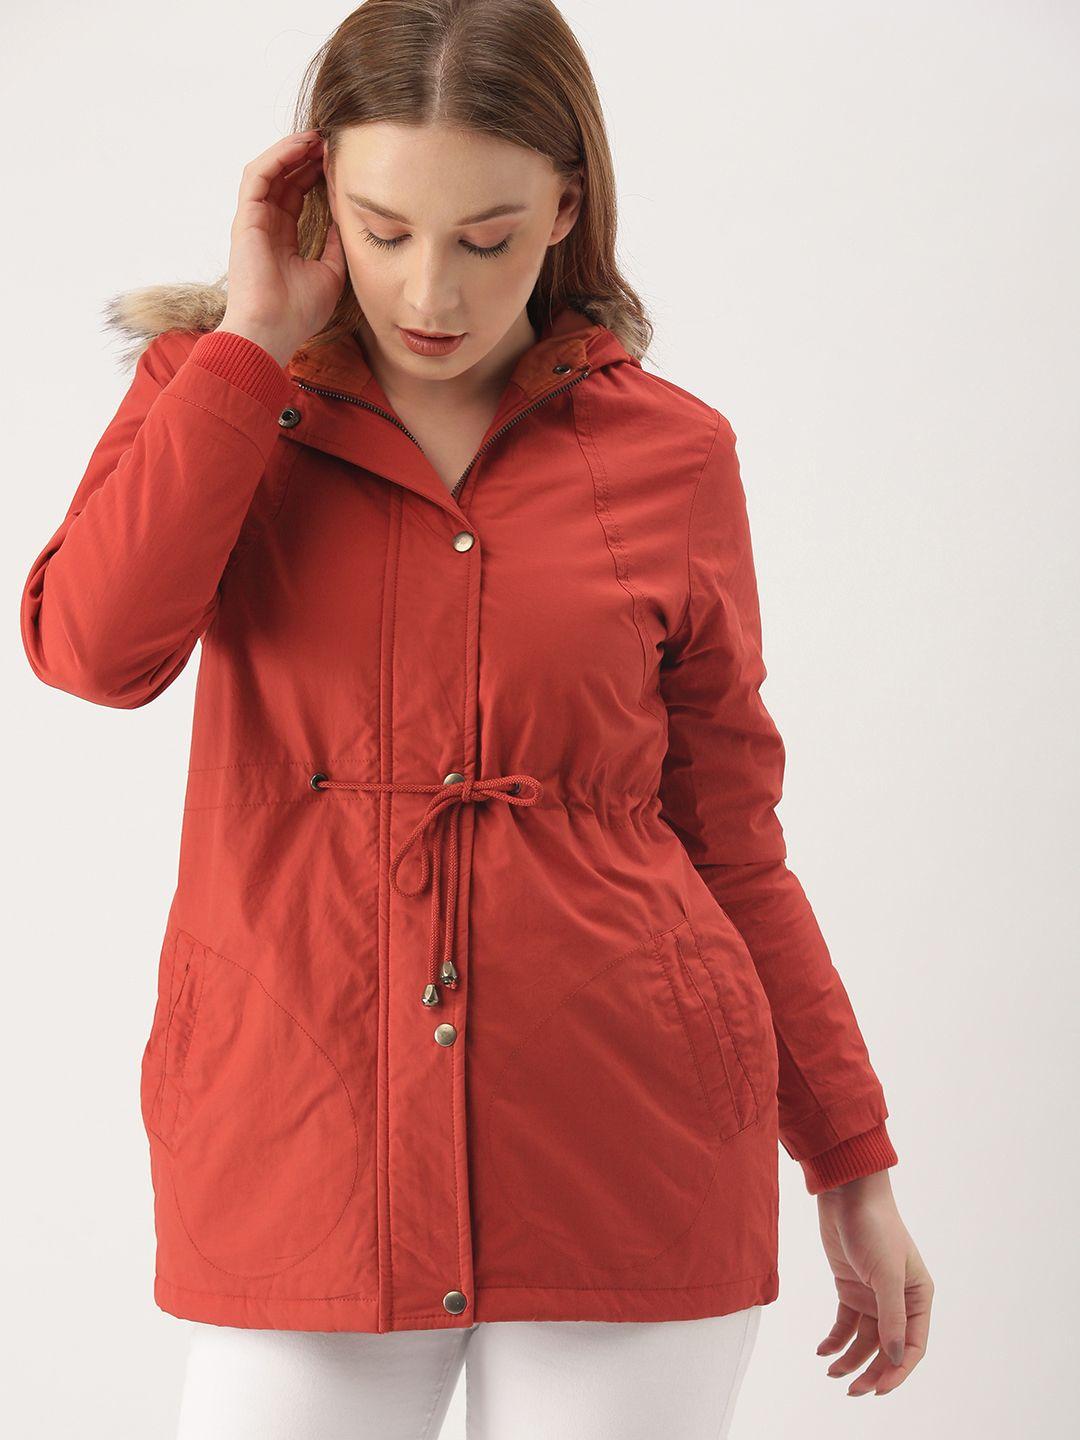 dressberry women rust red solid hooded parka jacket